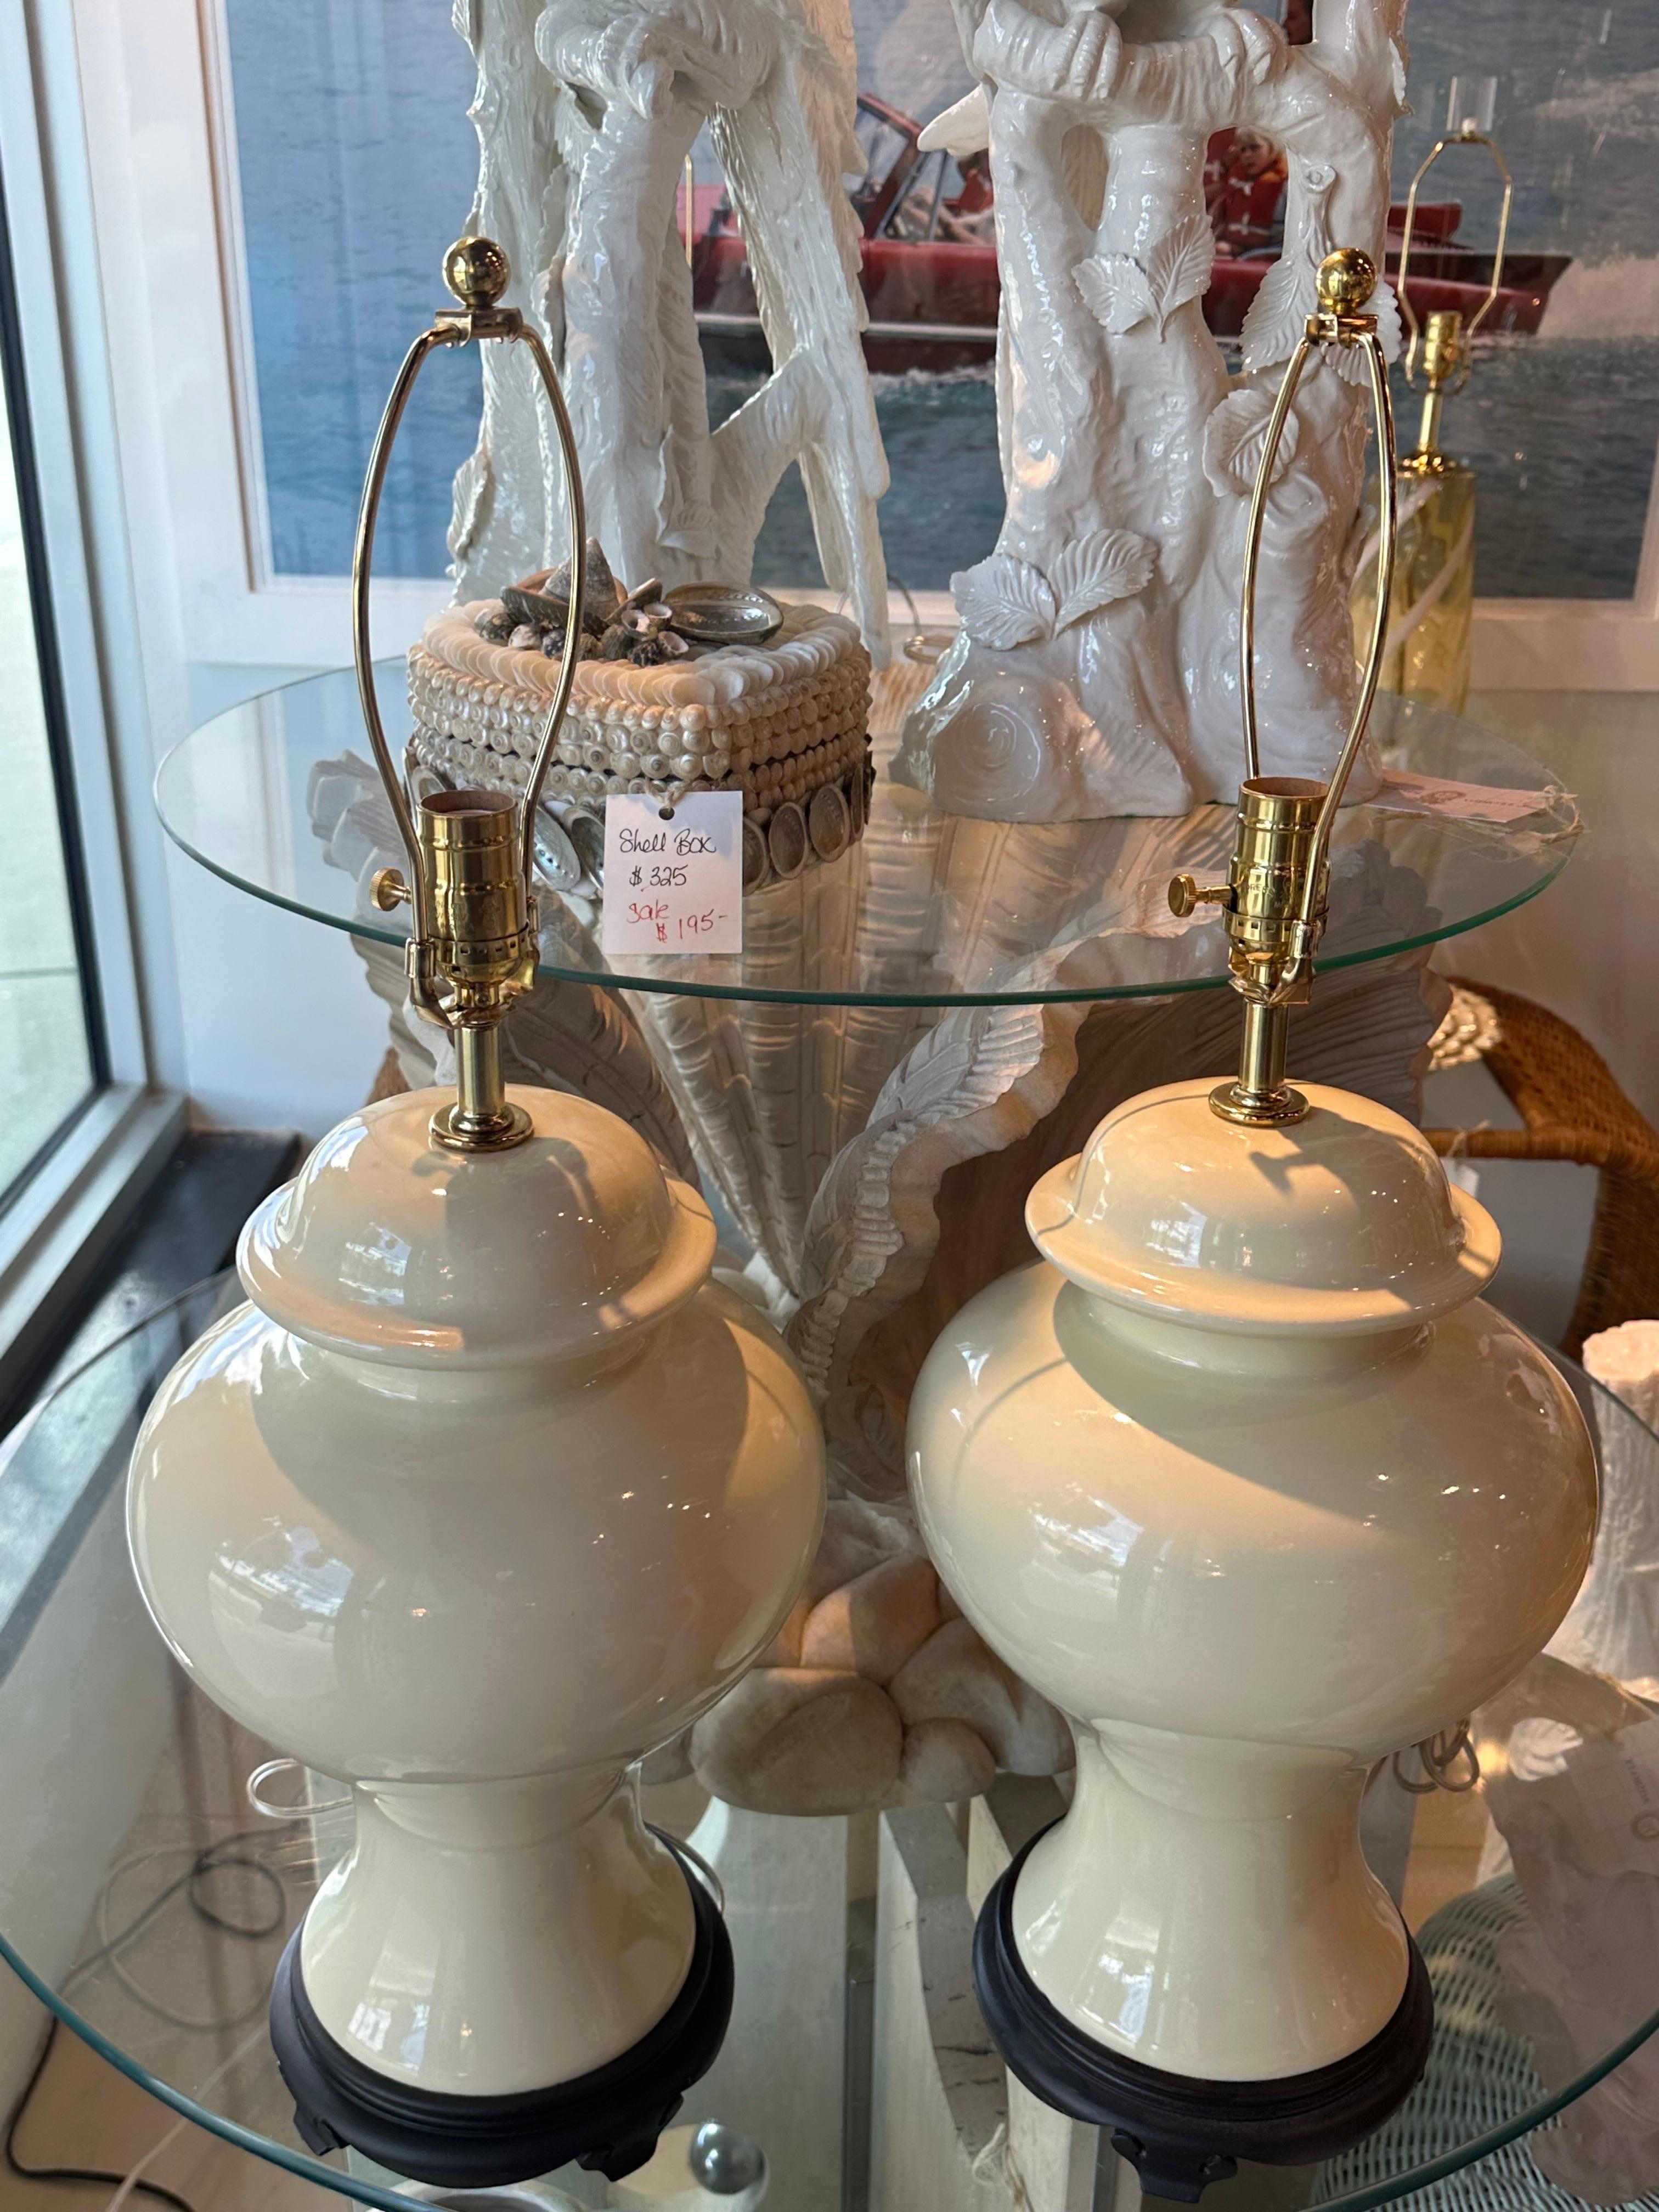 Vintage pair of ivory cream of white ceramic 1970s ginger jar table lamps, wood base. New wired, 3 way sockets, clear cord, all new brass hardware. Small crazing line on back of lamp base, see photo. Dimensions: 27 H (to top of finial) x 20 H (to